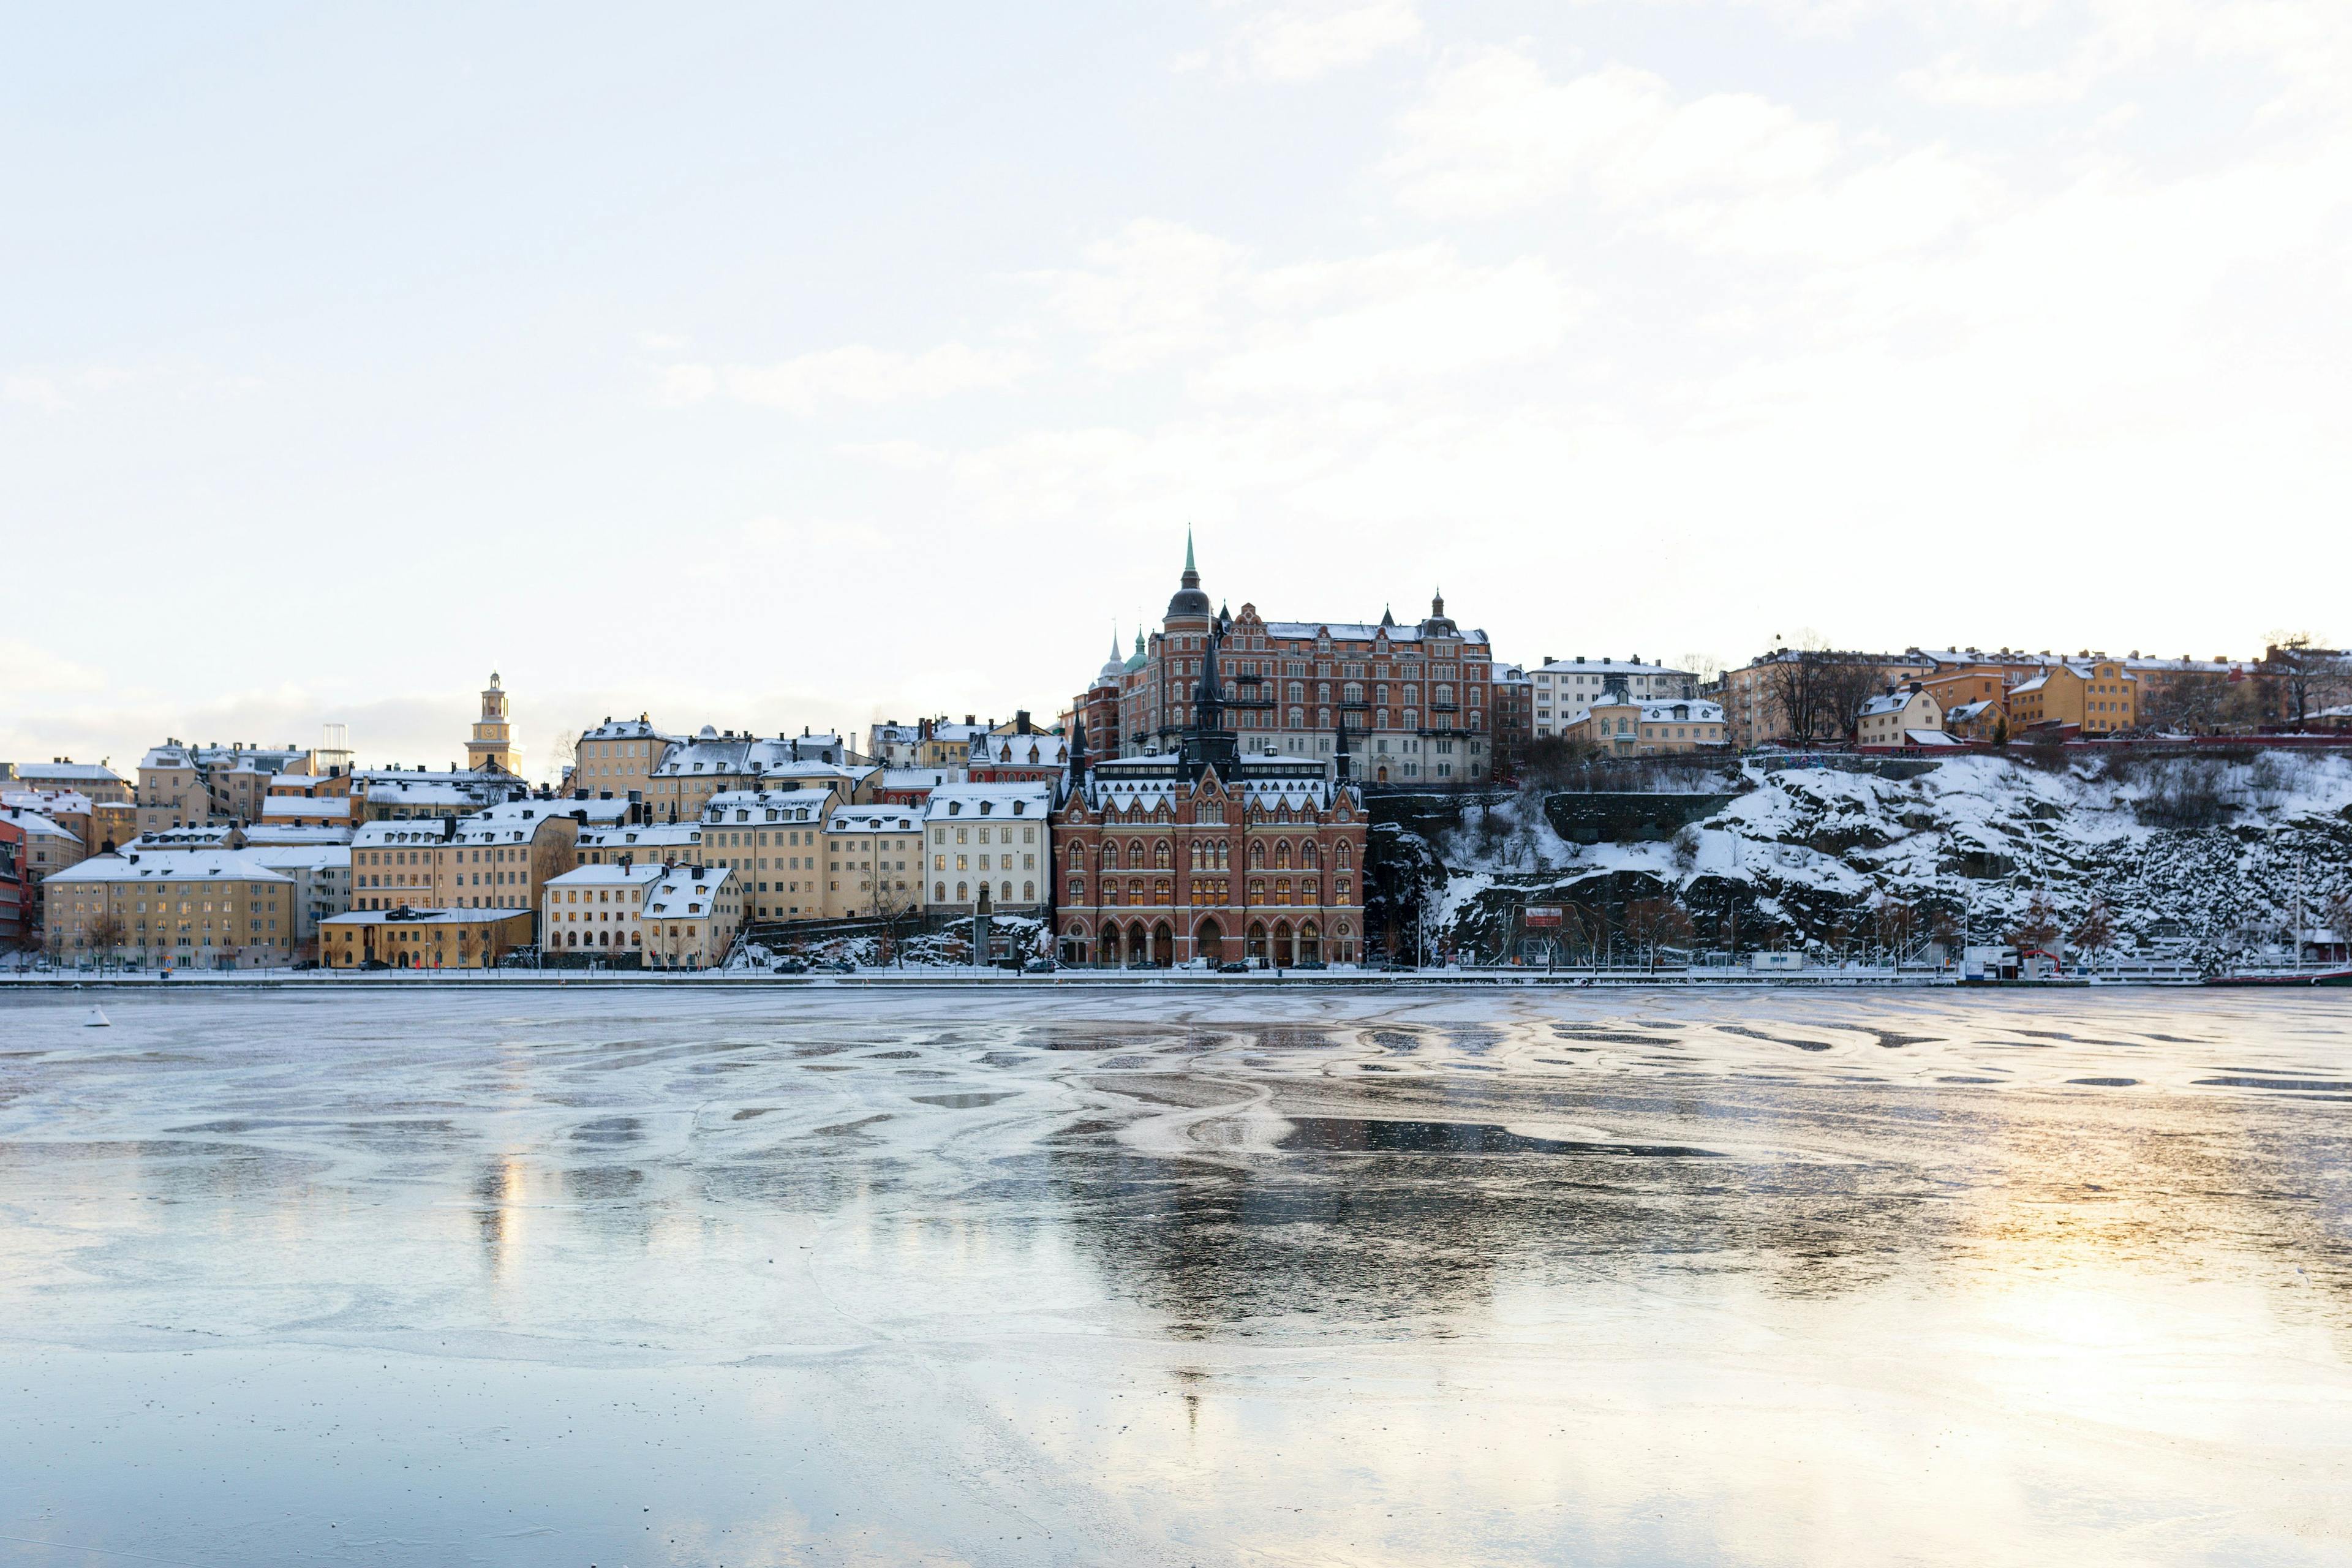 Cold winter light shining upon ice. Stockholm Södermalm in the background.